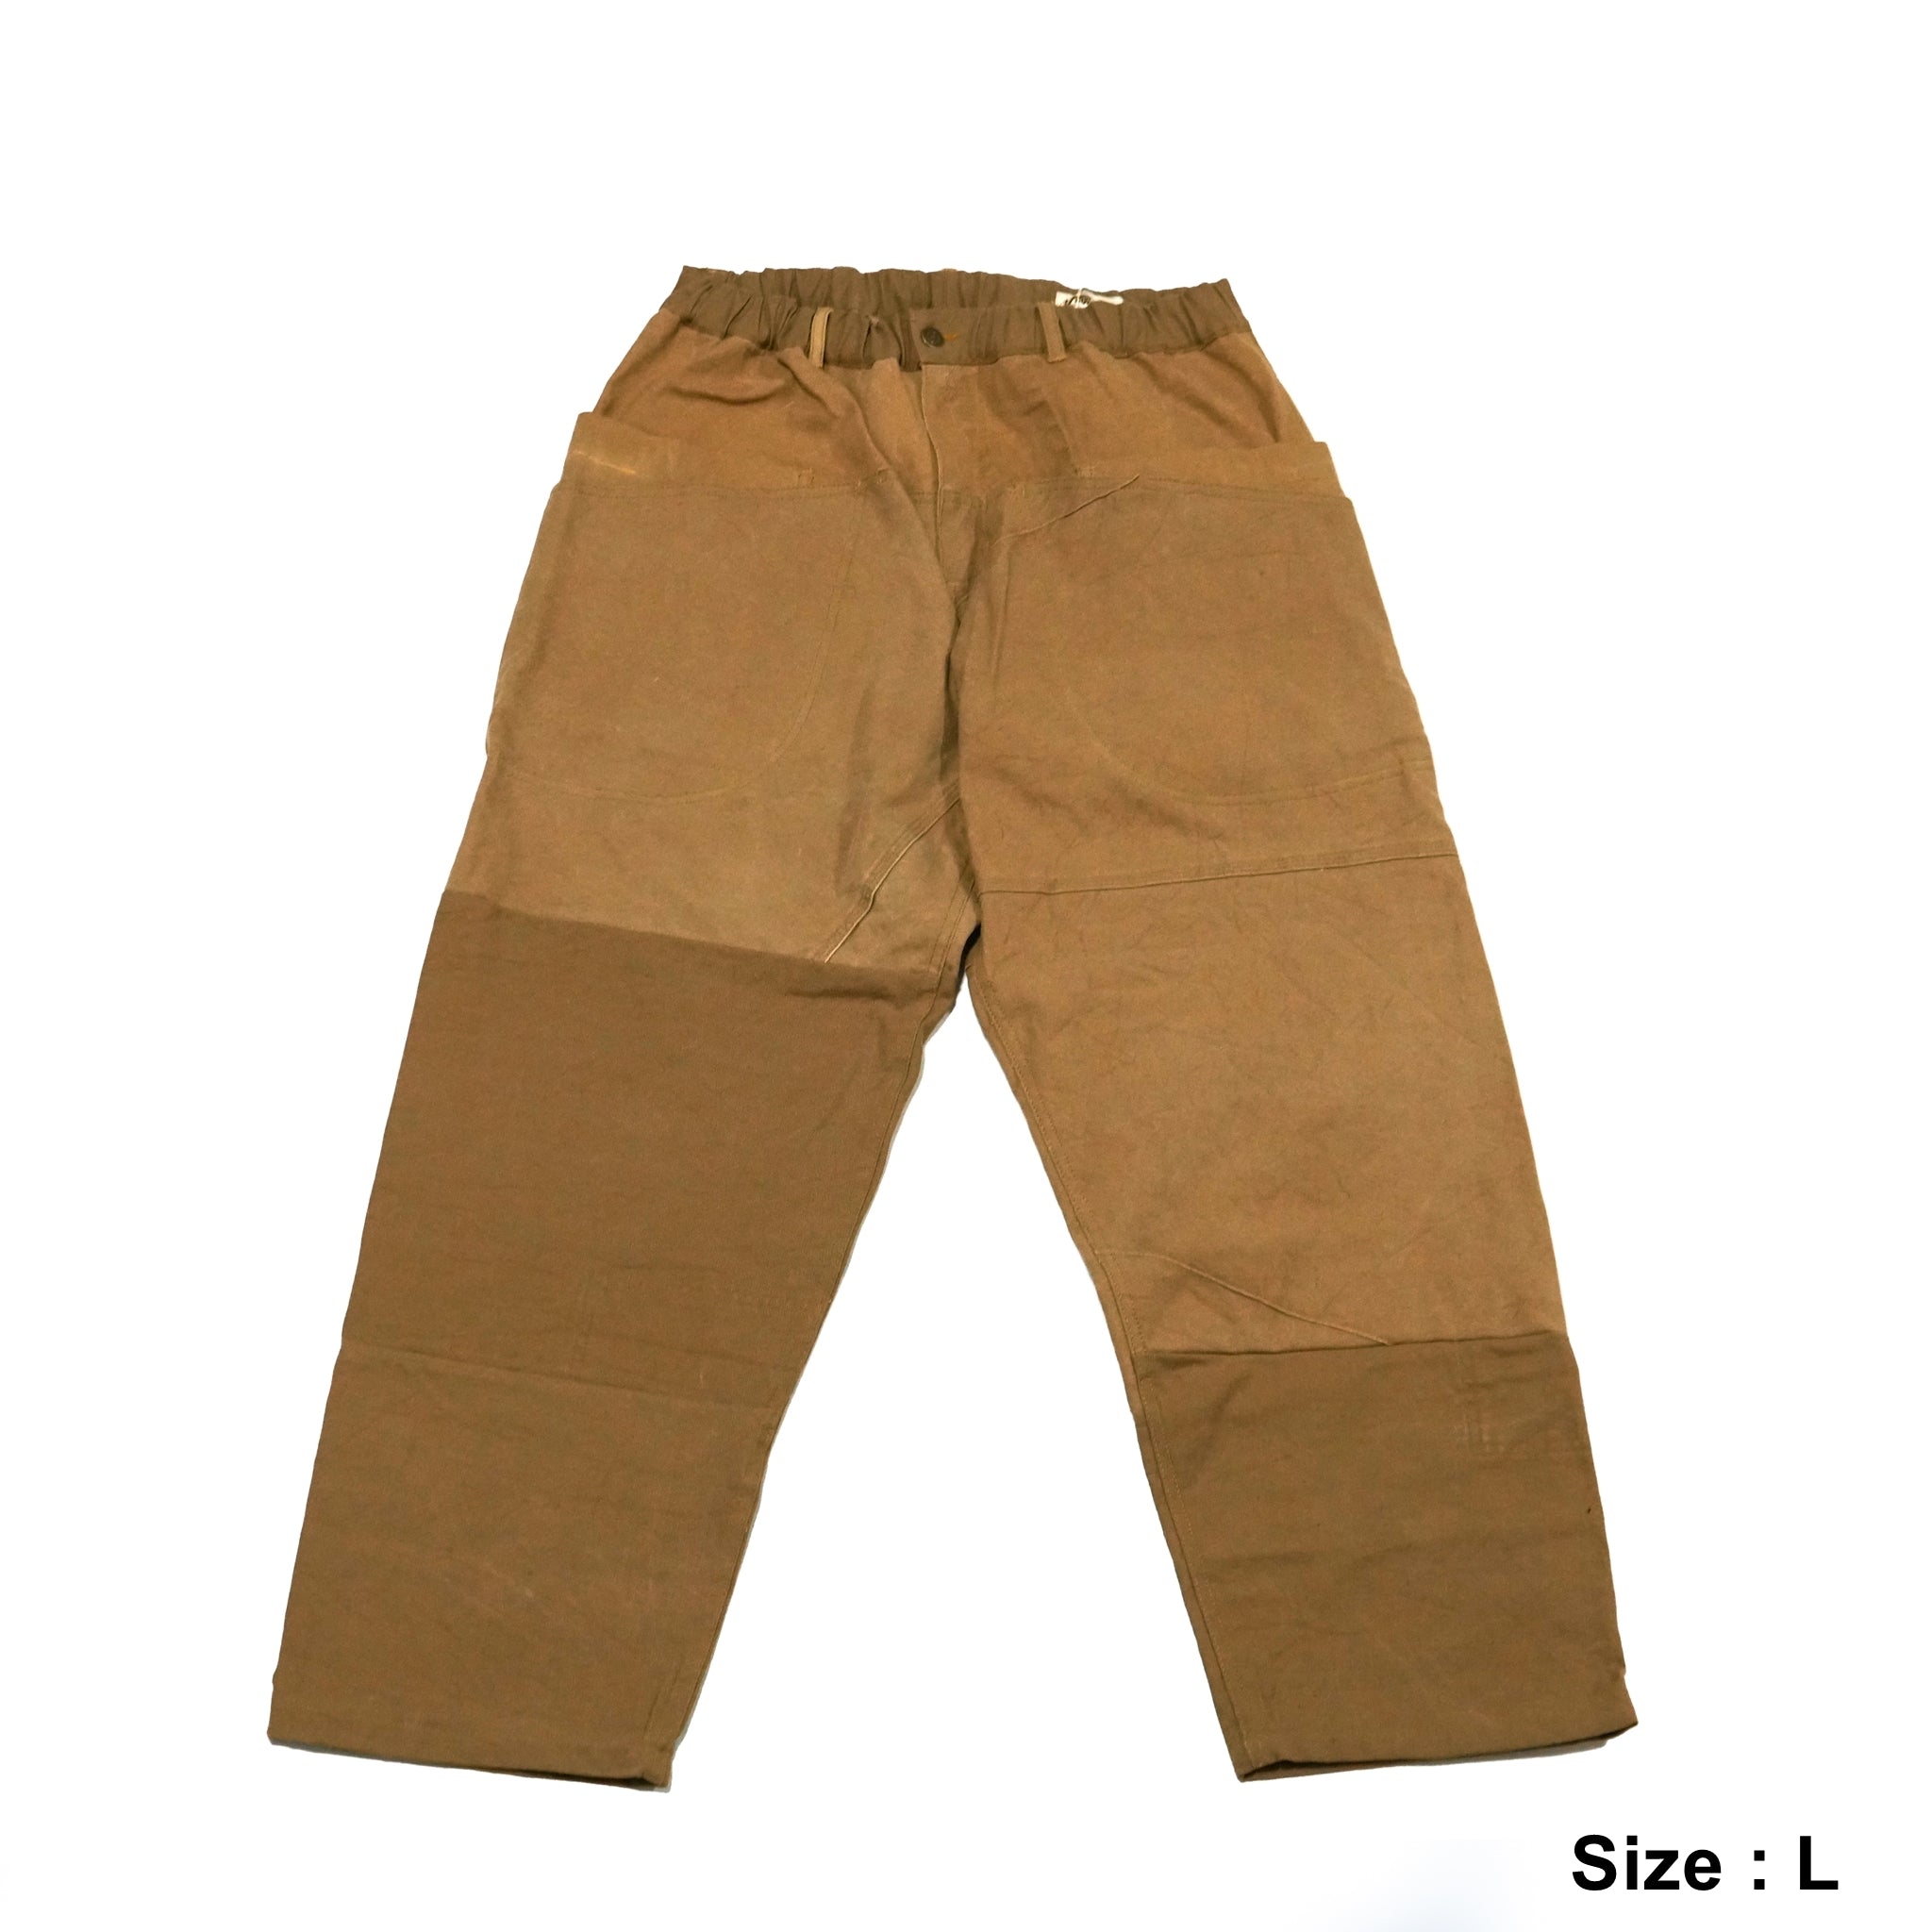 No:RP0504301_a | Name:MOOSE PANTS | Color:02-Duck【NASNGWAM_ナスングワム】